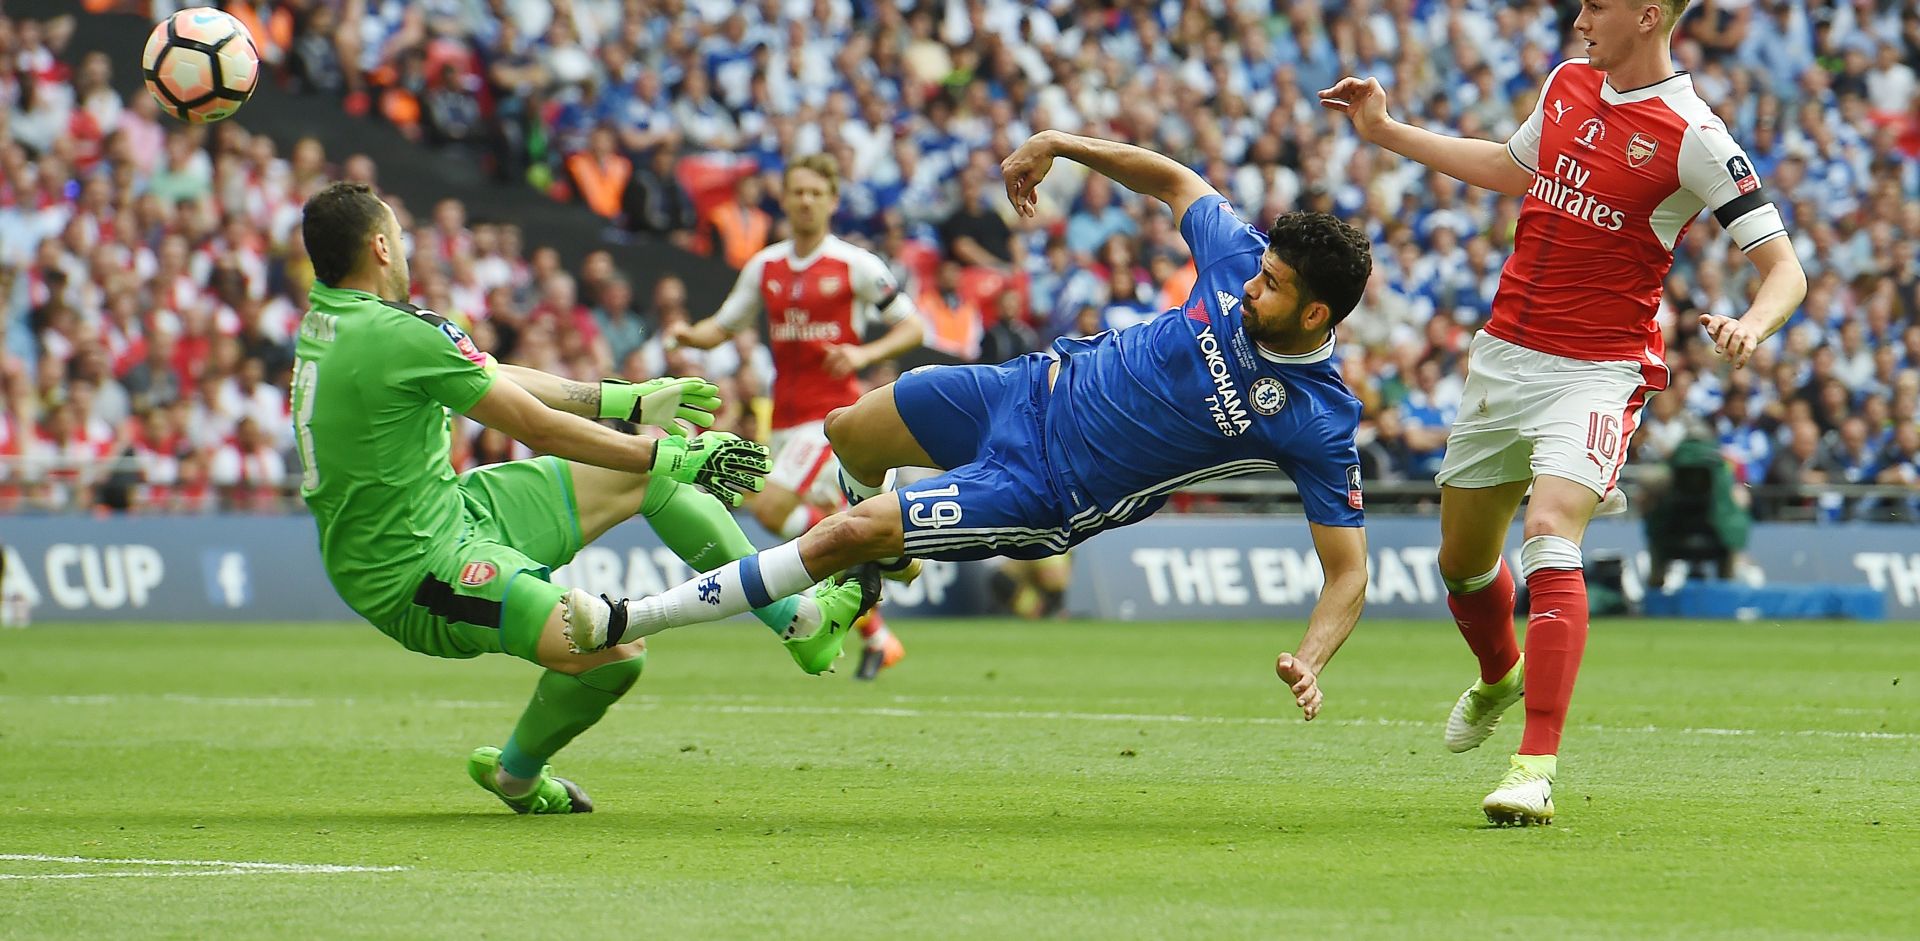 epa05993728 Chelsea's Diego Costa (C) competes for the ball with Arsenal keeper David Ospina (L)  during the FA Cup final match Arsenal vs Chelsea at Wembley Stadium in London, Britain, 27 May 2017.  EPA/ANDY RAIN EDITORIAL USE ONLY. No use with unauthorized audio, video, data, fixture lists, club/league logos or 'live' service. Online in-match use limited to 75 images, no video emulation. No use in betting, games or single club/league/player publications